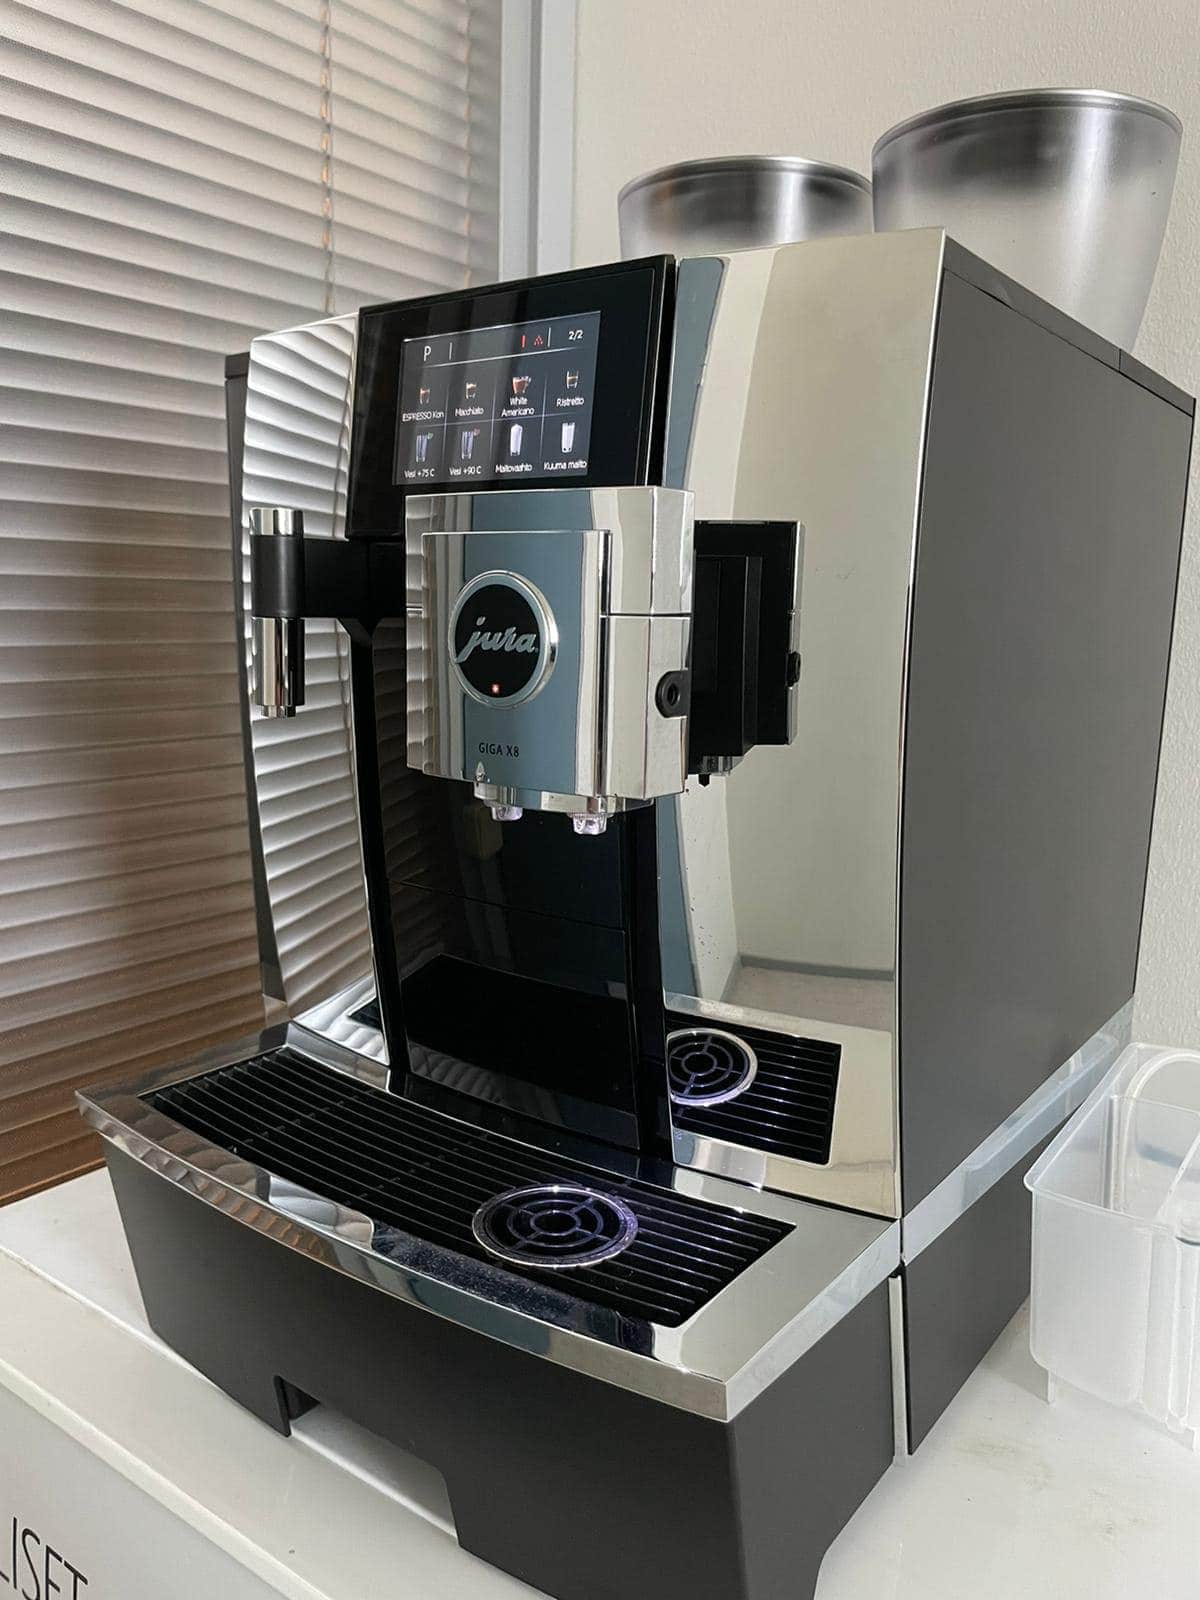 Jura X8 is equipped with an AromaG3 grinder, the same as Jura We8